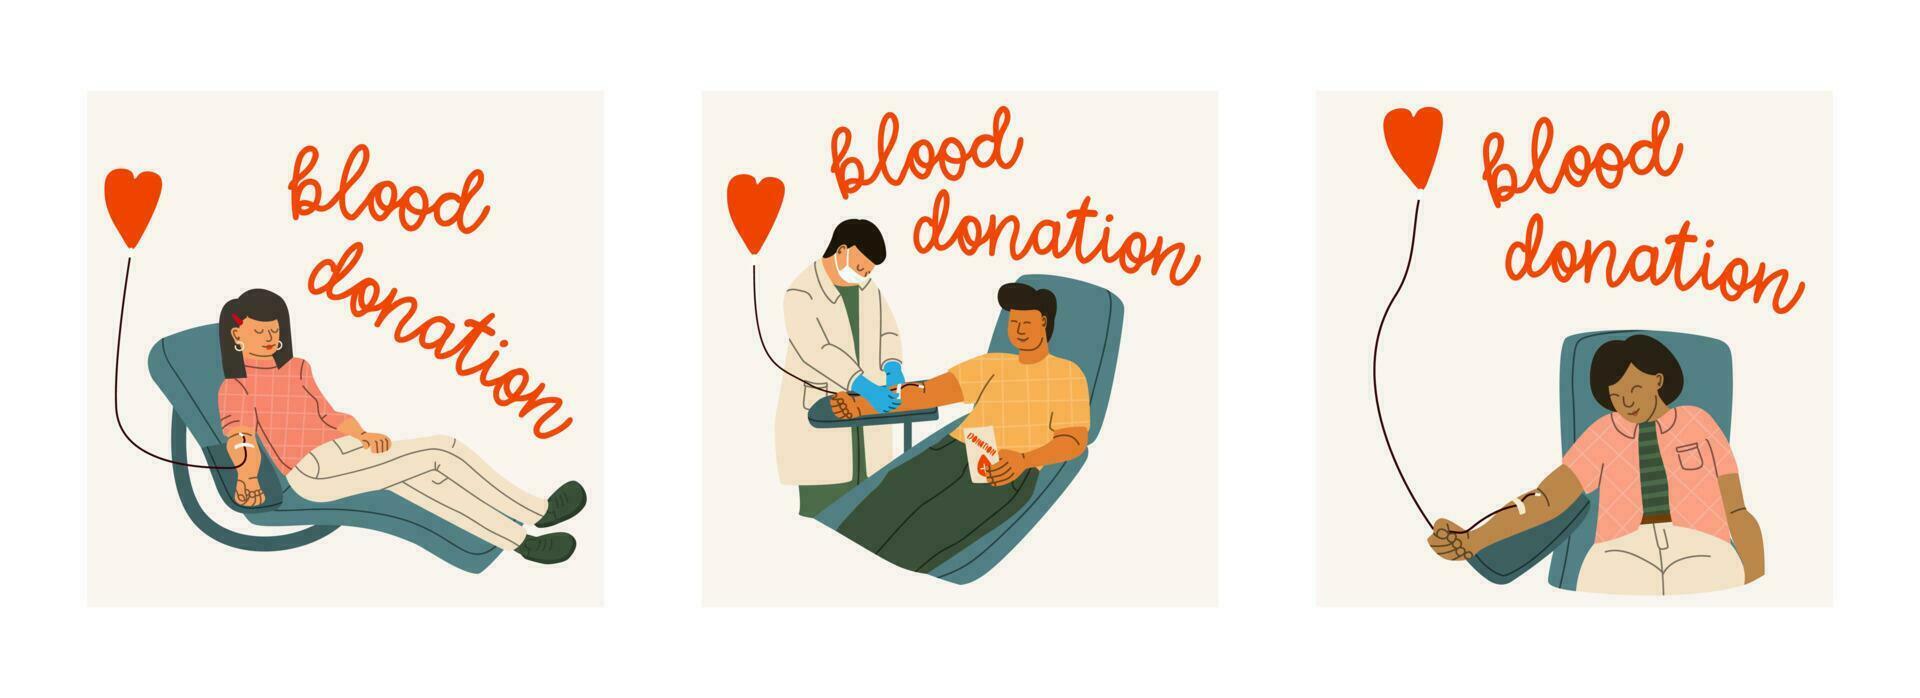 Set of vector illustrations on blood donor concept. Men and women donate blood voluntarily. A nurse or doctor in a medical uniform and a protective mask assists at the blood transfusion station.